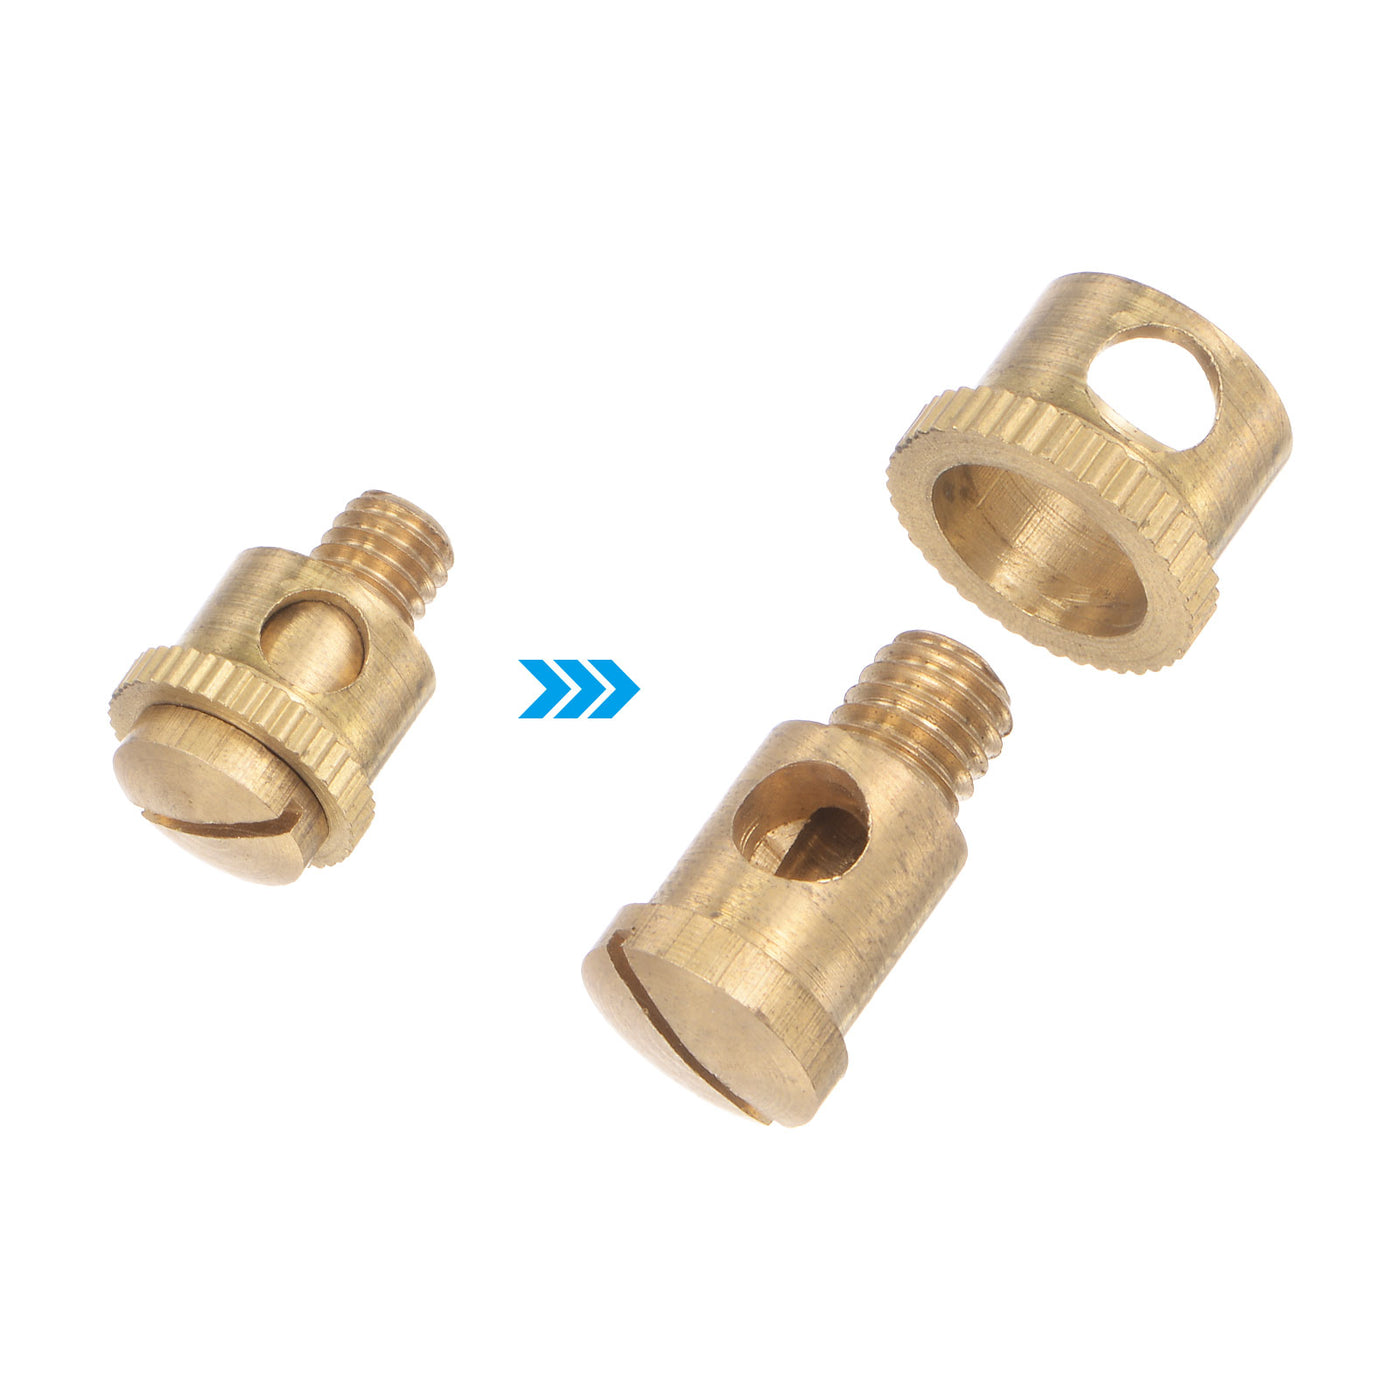 uxcell Uxcell Brass Straight Hydraulic Grease Fitting Accessories M6 x 1mm Thread, 2Pcs